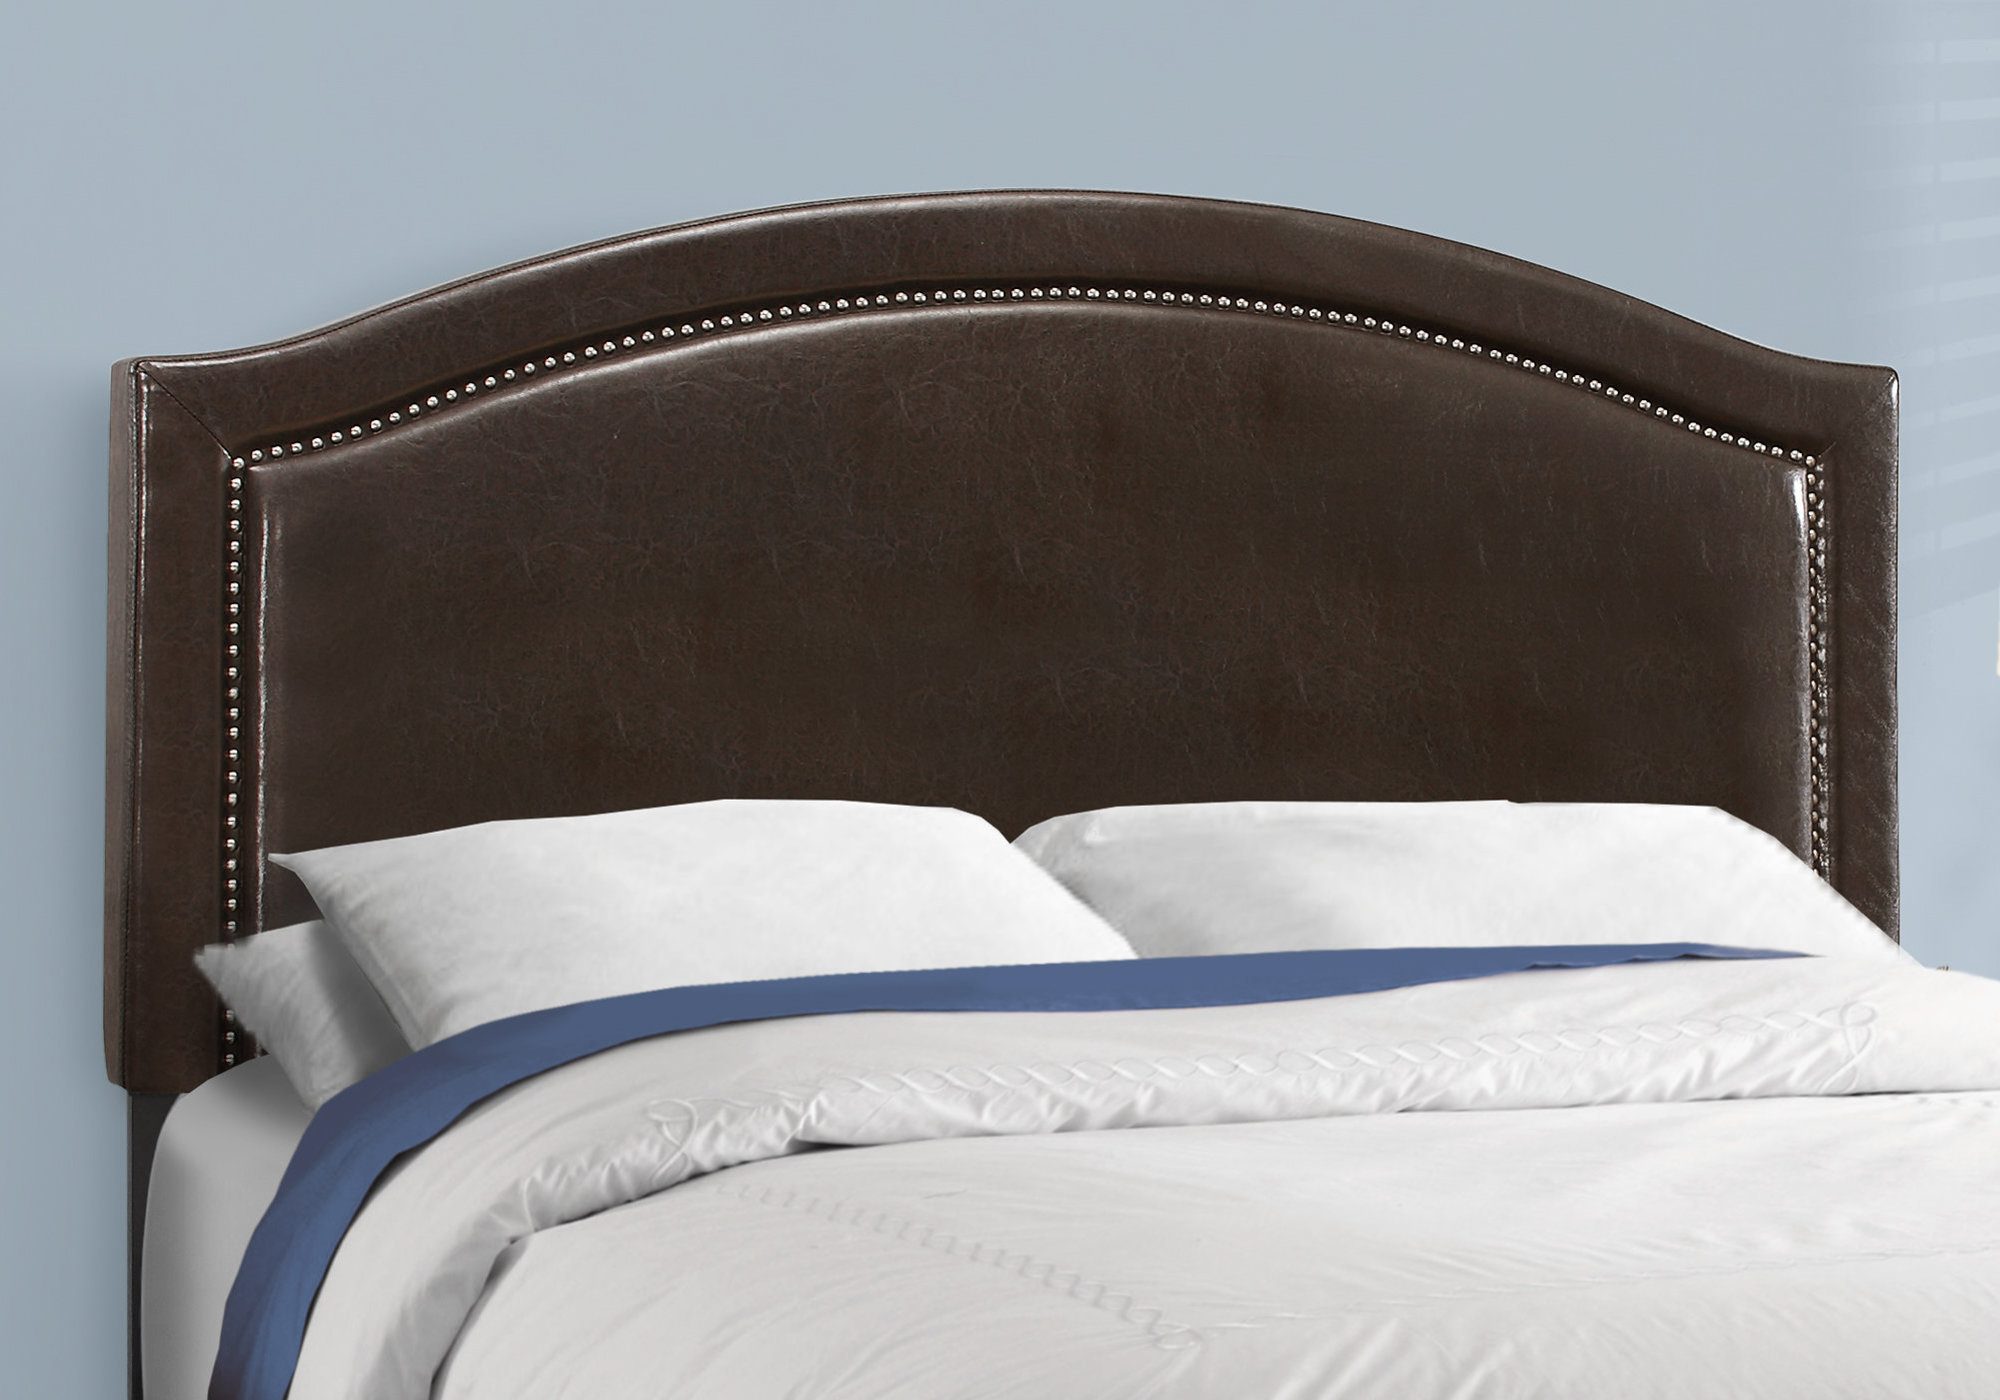 Bed - Queen Size / Classic  Leather-Look With Brass Trim